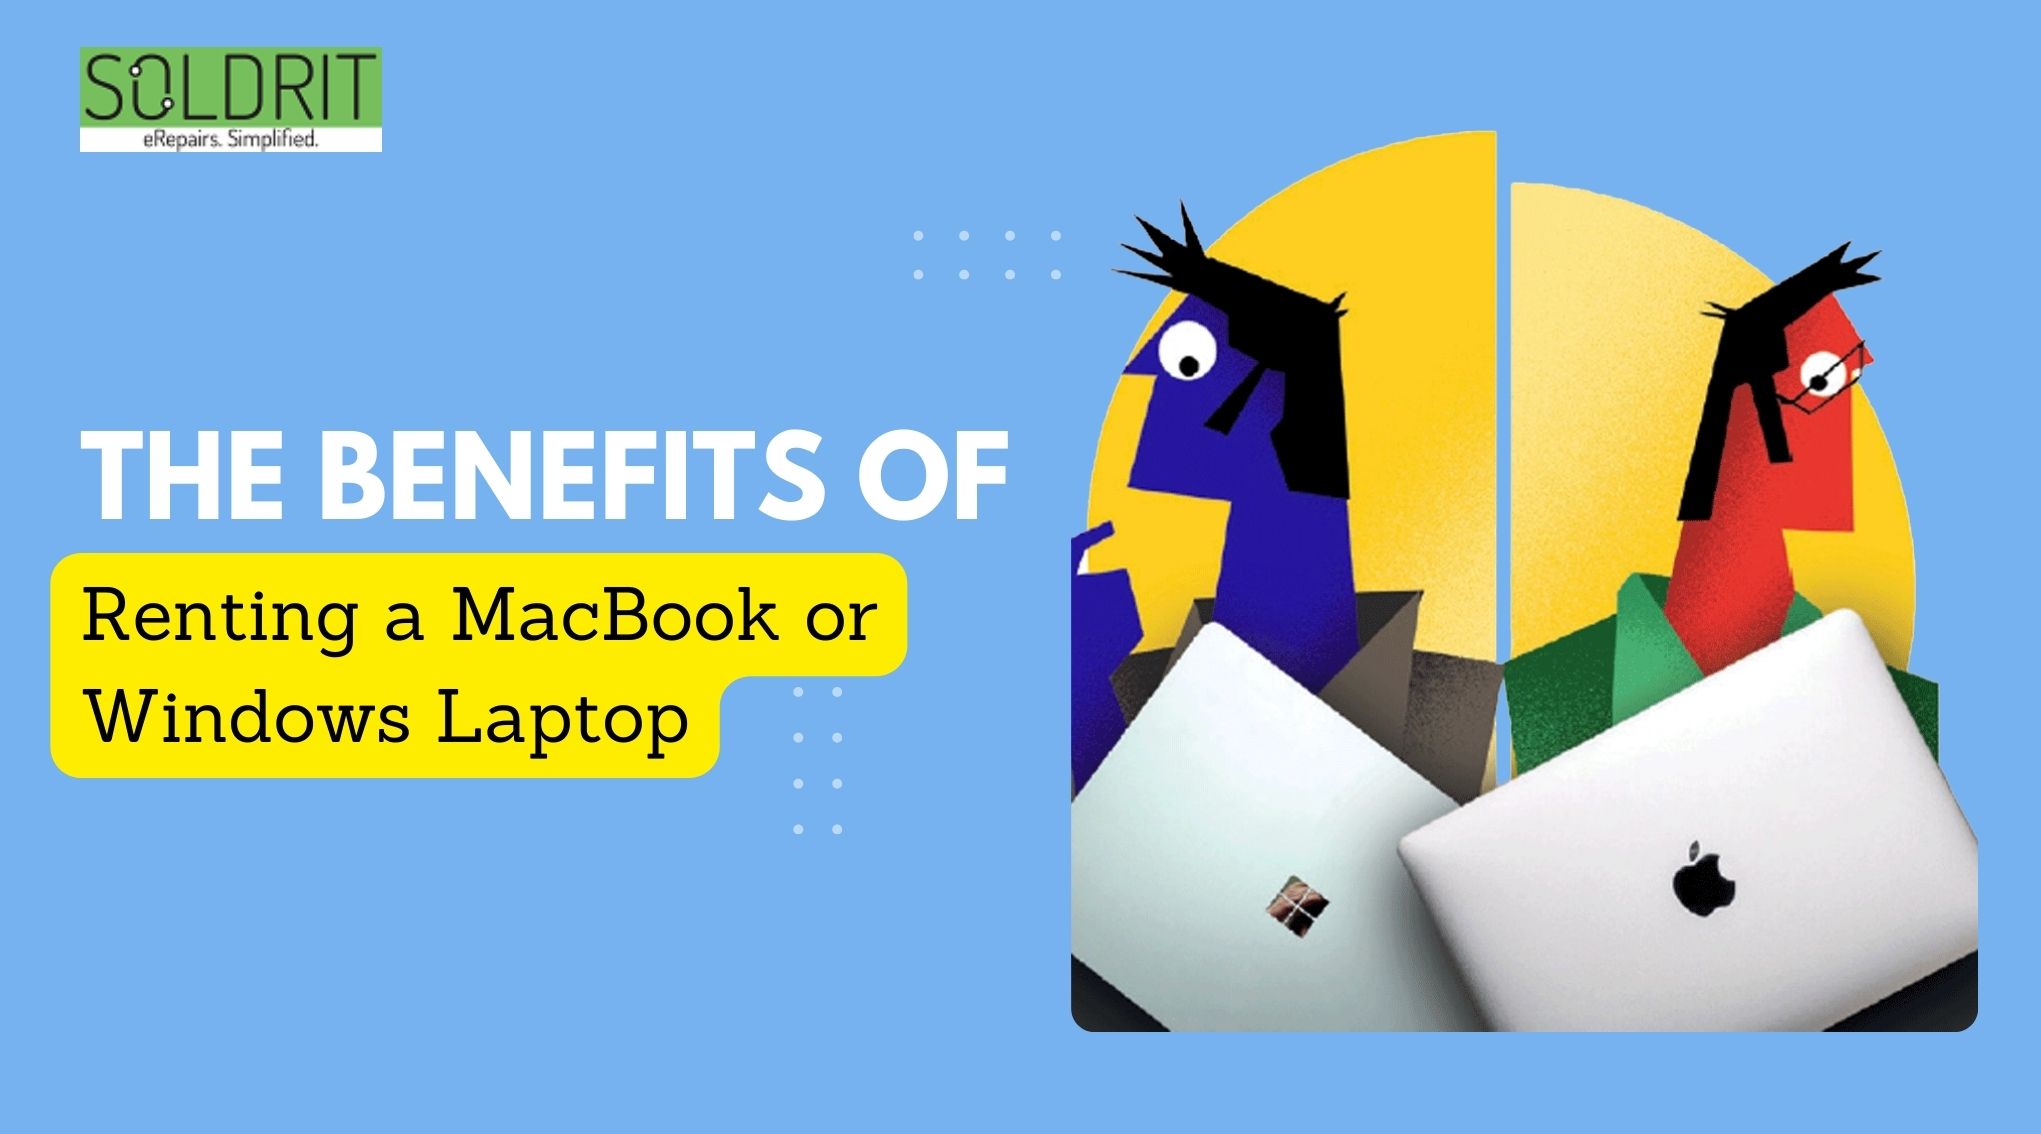 The Benefits of Renting a MacBook or Windows Laptop